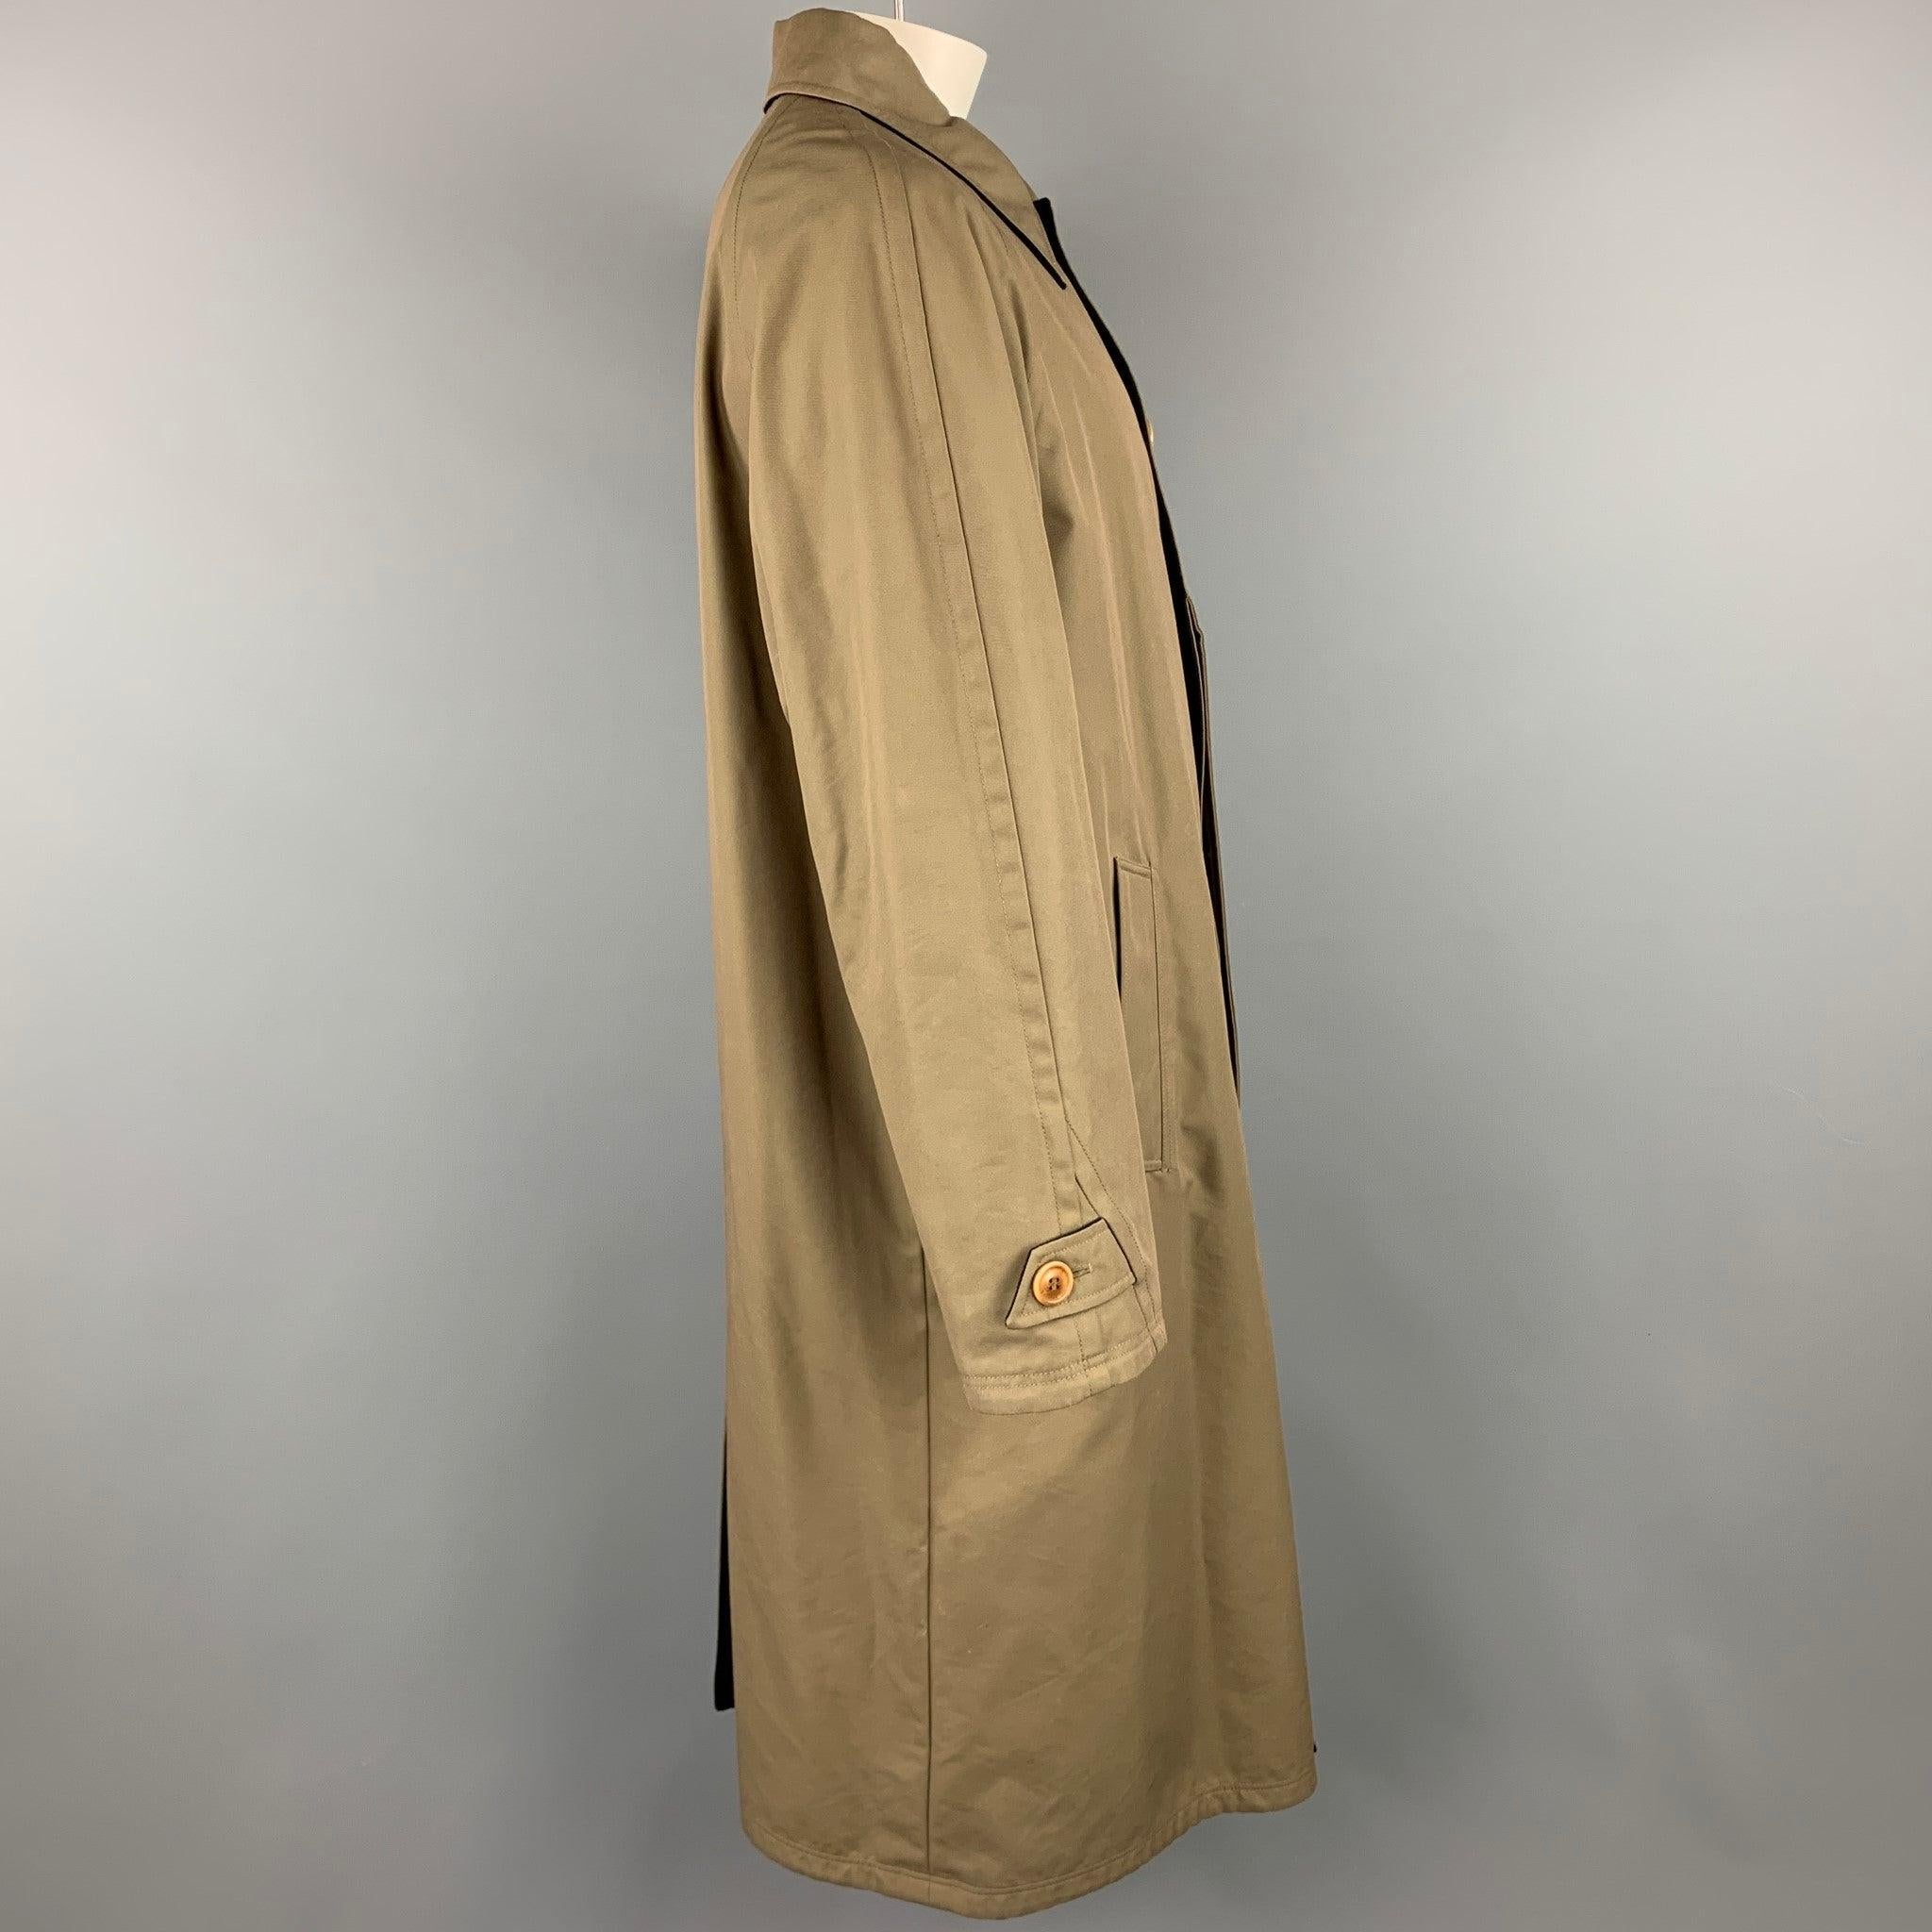 ERMENEGILDO ZEGNA coat comes in a olive & black wool blend featuring a reversible style, slit pockets, spread collar, and a hidden button closure. Moderate wear. Made in Italy.Good Pre-Owned Condition. 

Marked:  L/52 

Measurements: 
 
Shoulder: